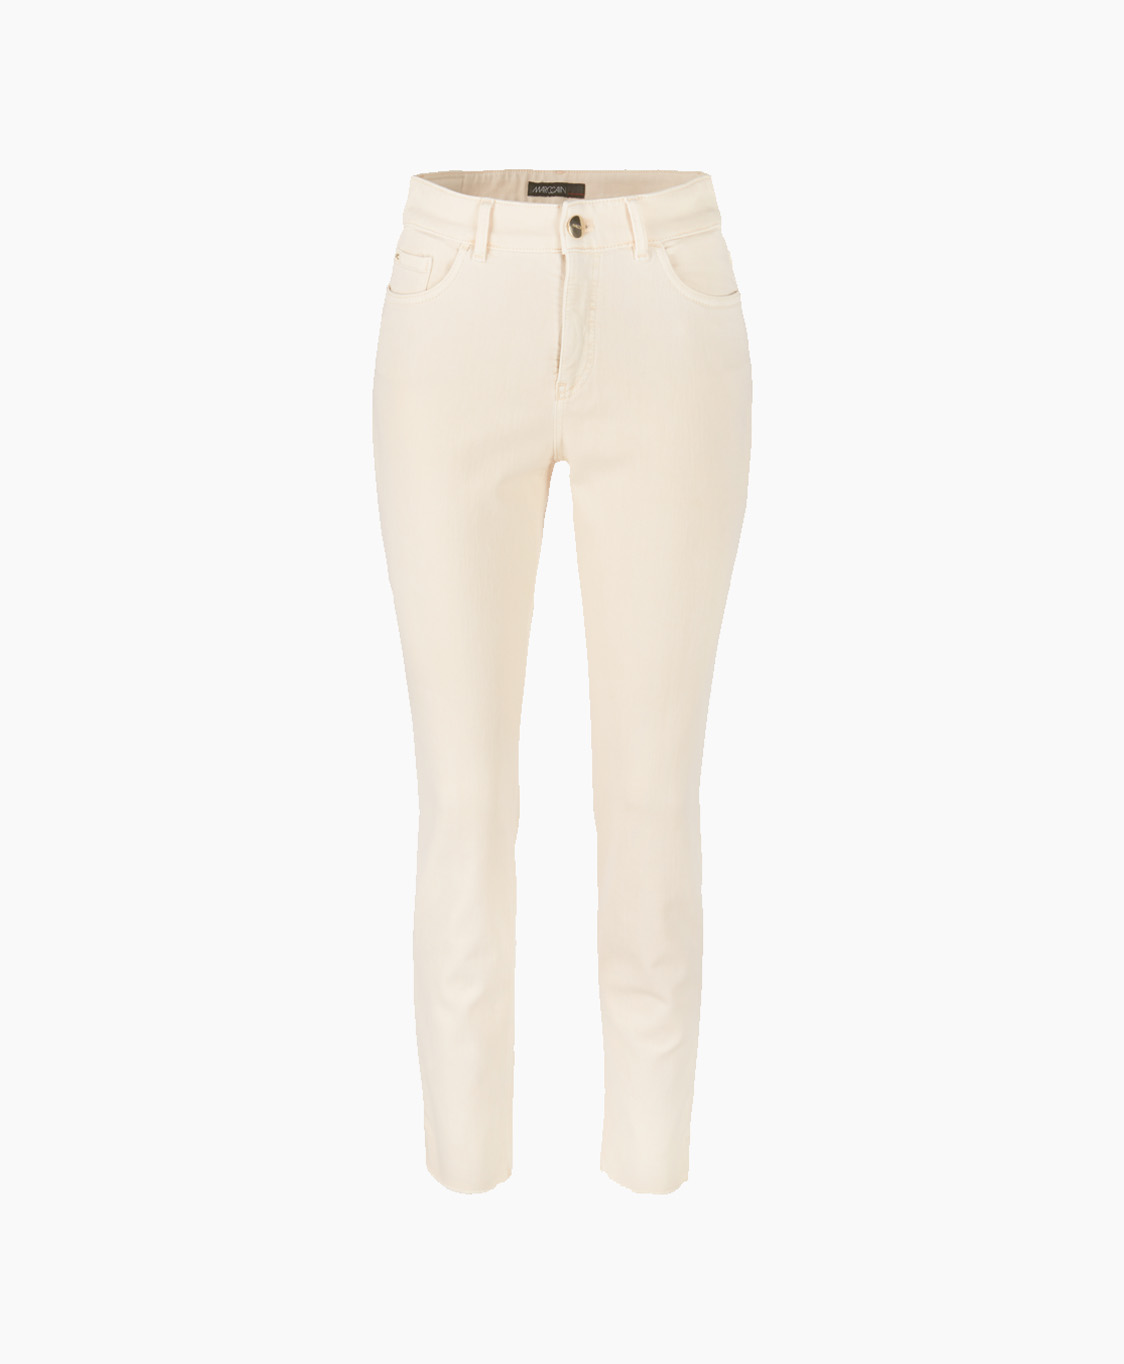 Marccain Collectie Jeans Uc 82.11 D60 Room